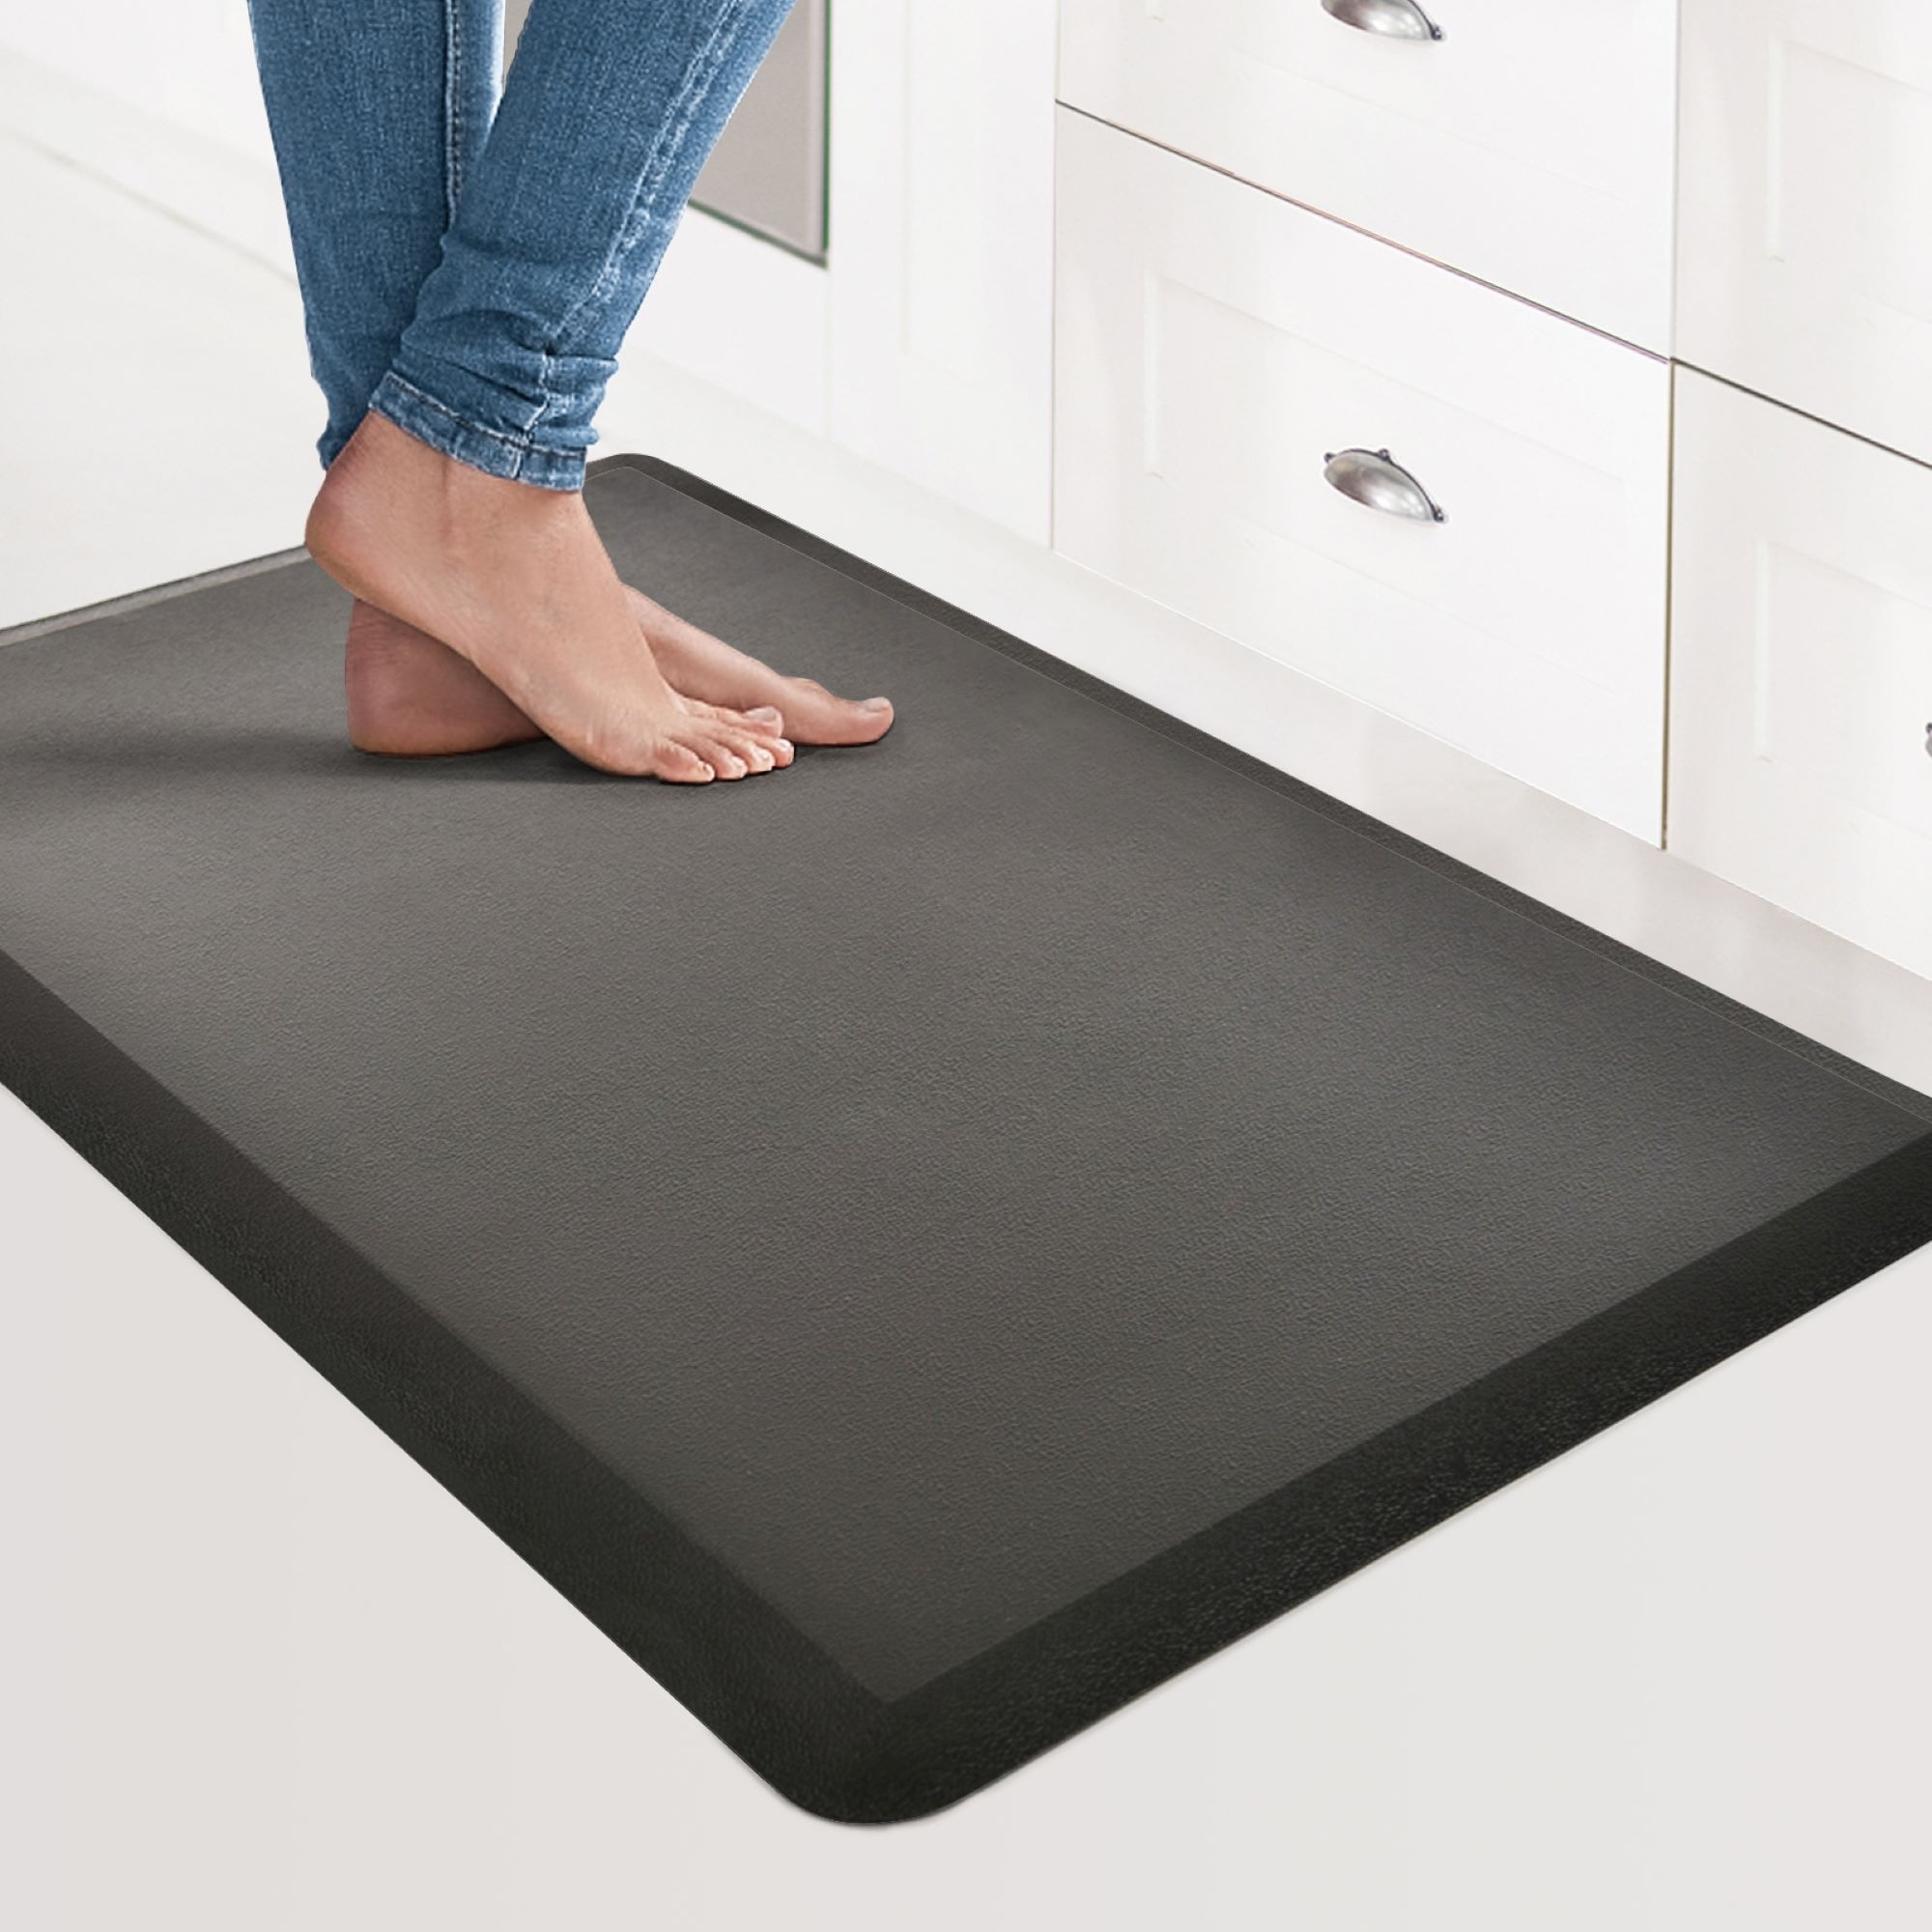 KOKHUB Kitchen Mat and Rugs 2 PCS, Cushioned 1/2 Inch Thick Anti Fatigue  Waterproof Comfort Standing Desk/ Kitchen Floor Mat with Non-Skid &  Washable